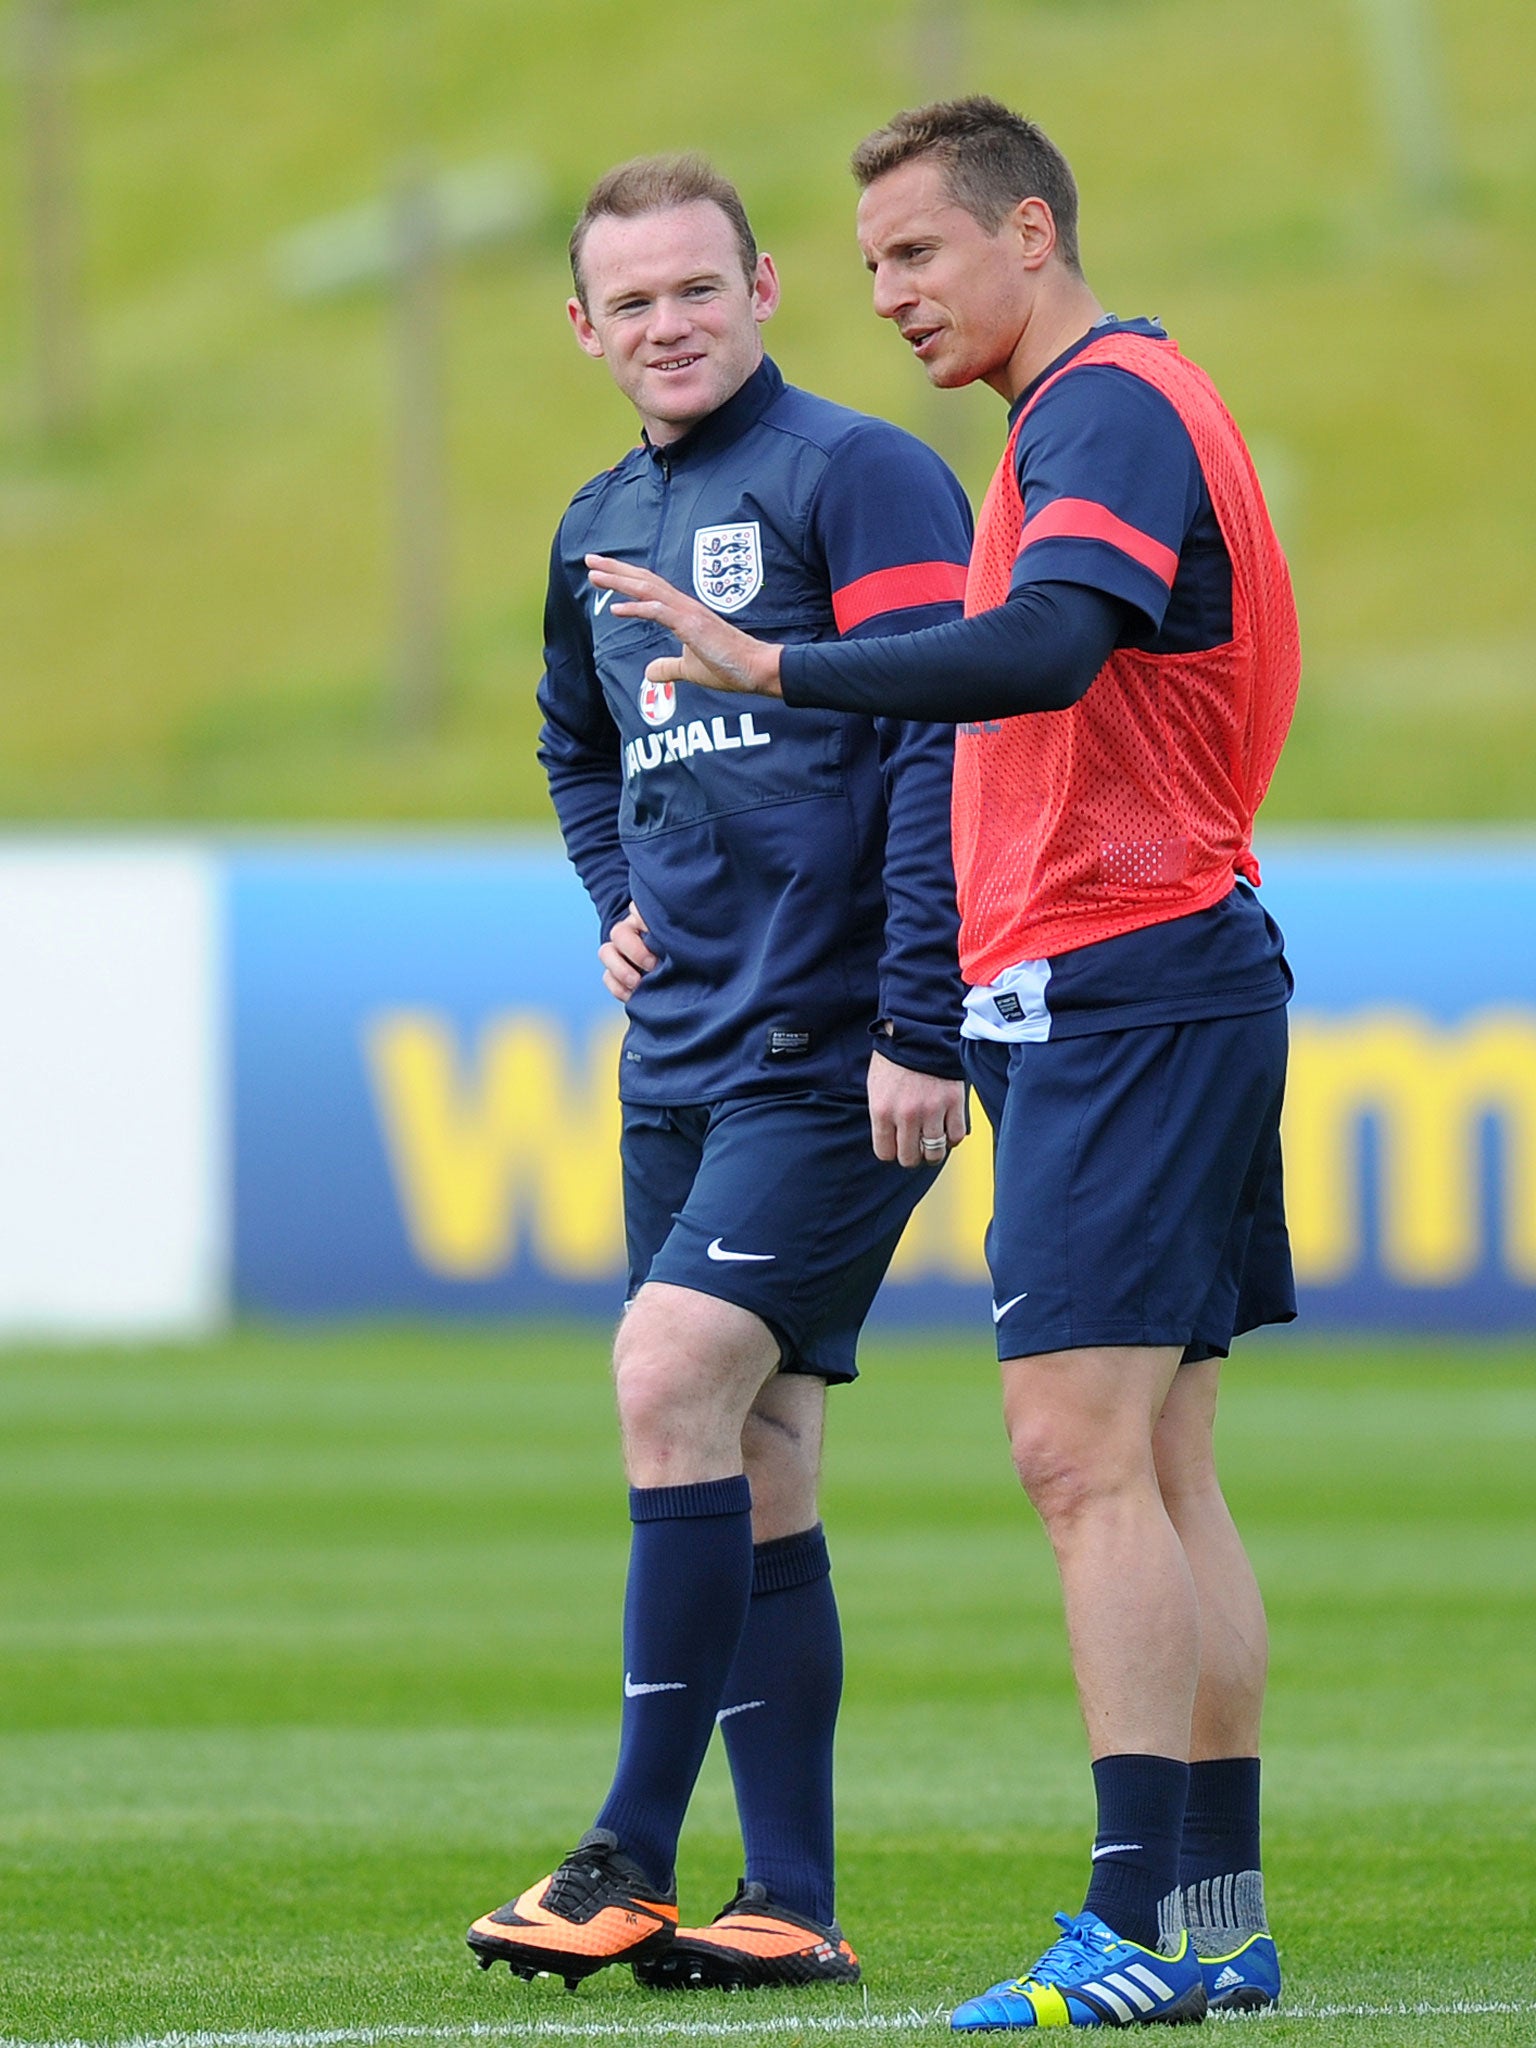 Wayne Rooney, left, and Phil Jagielka, right, at St George’s Park